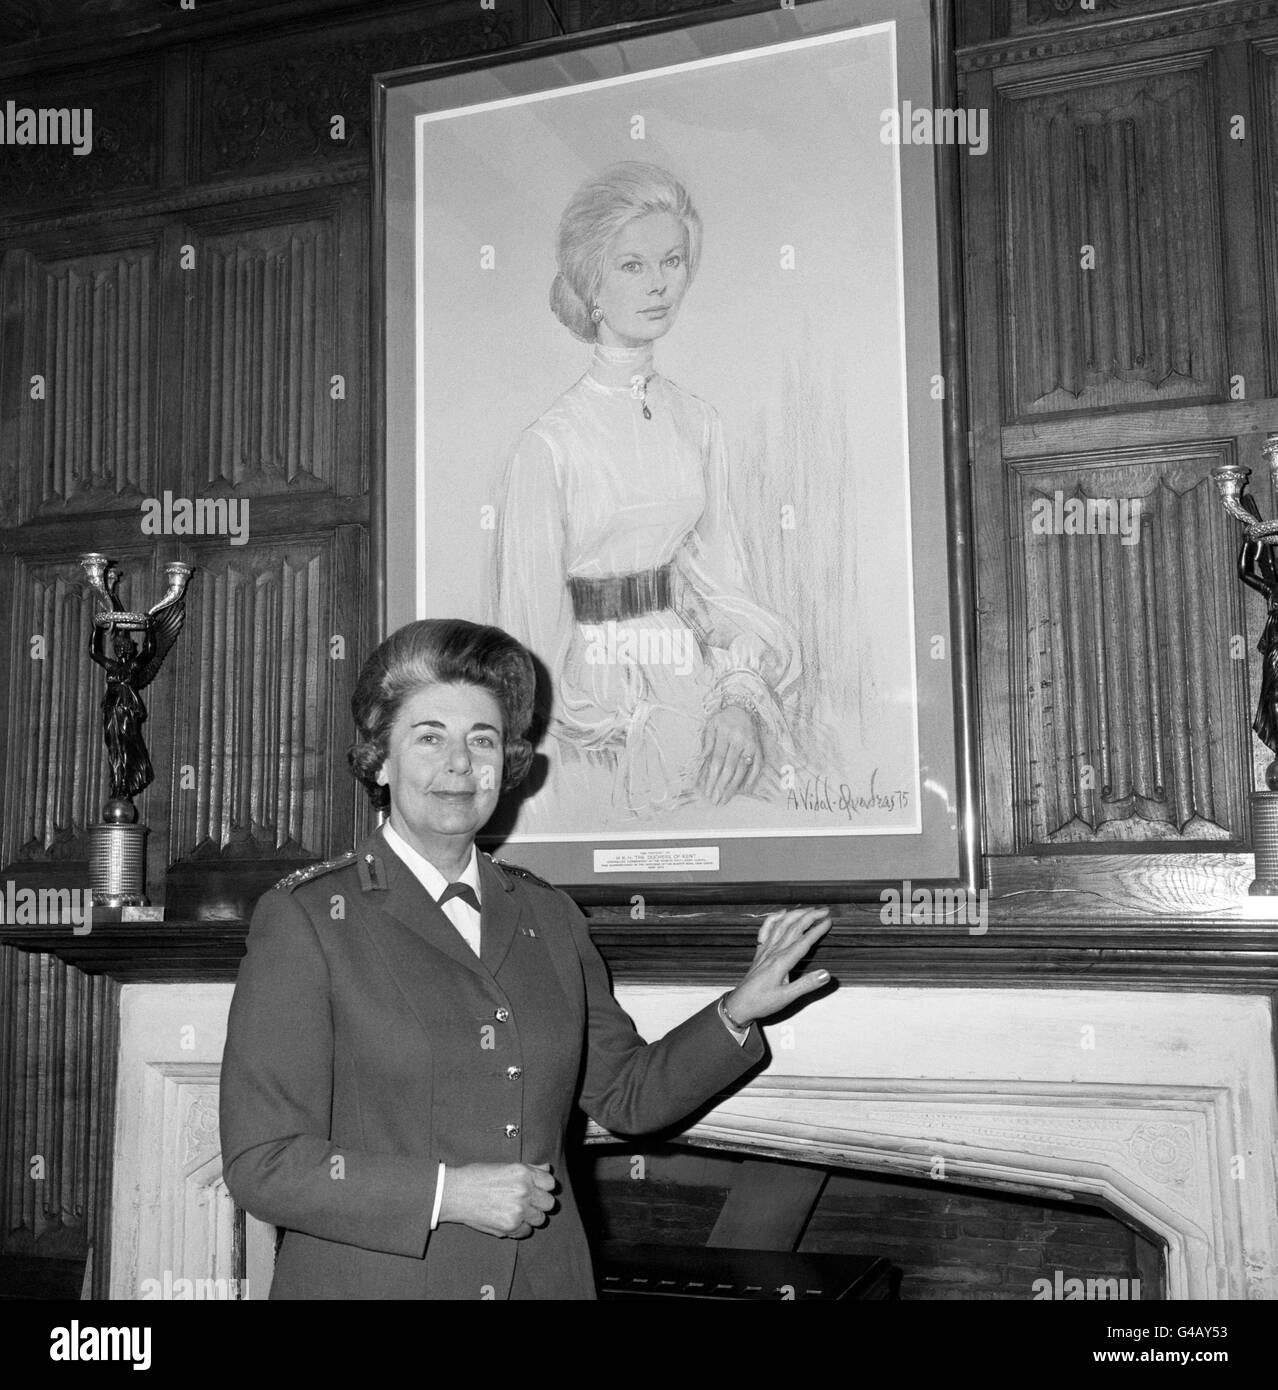 Brigadier Eileen Nolan, Director of the Women's Royal Army Corp, standing beneath a new portrait of the Duchess of Kent, Controller Commandant of the WRAC, in the headquarters mess in London. Stock Photo